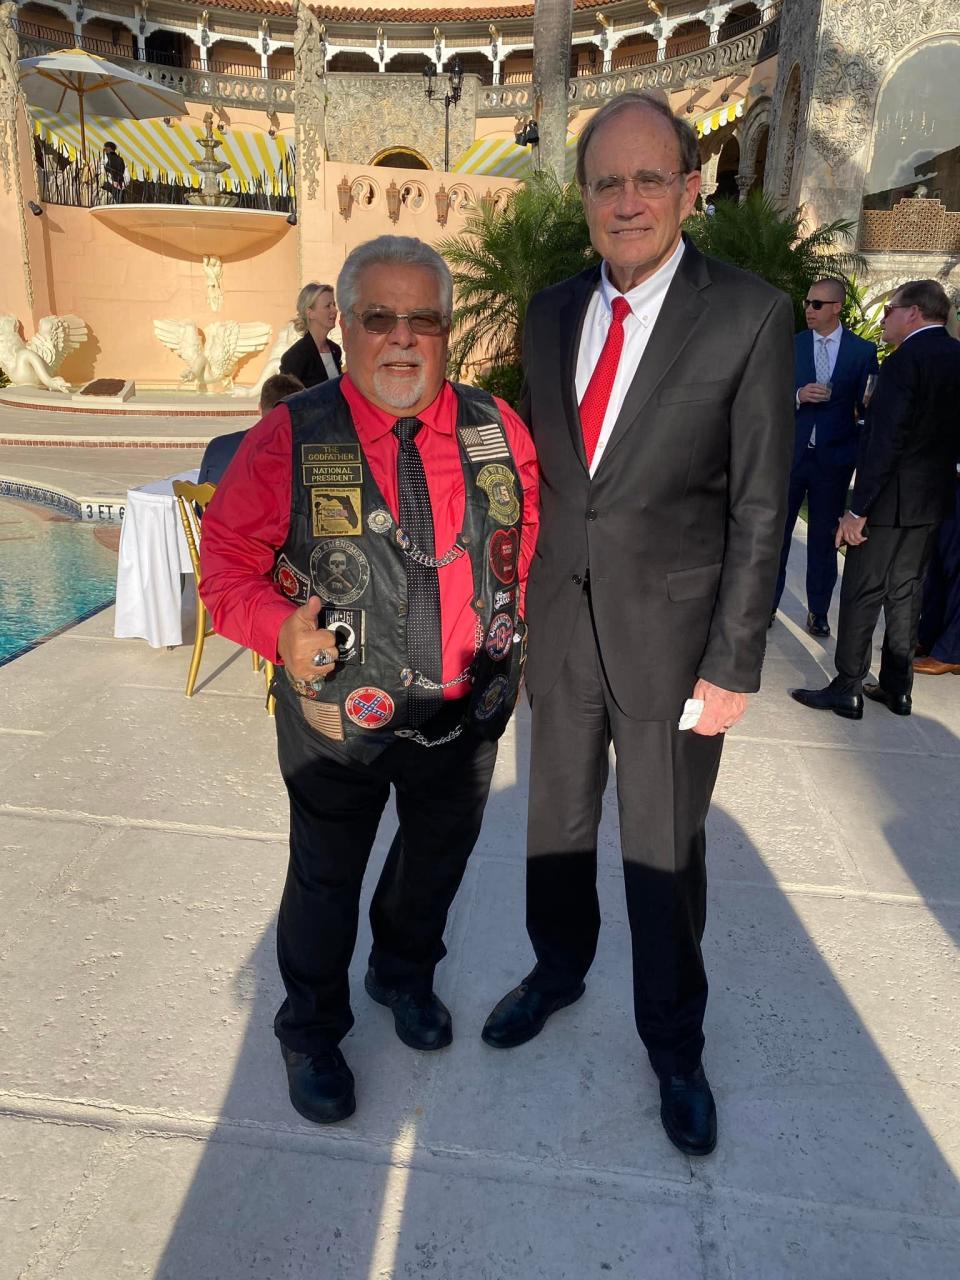 Mississippi Lt. Gov. Delbert Hosemann appears with George Colella, of Ready to Ride for 45, a pro-Trump personality who prominently features Confederate and pro-January 6 patches on his vest.